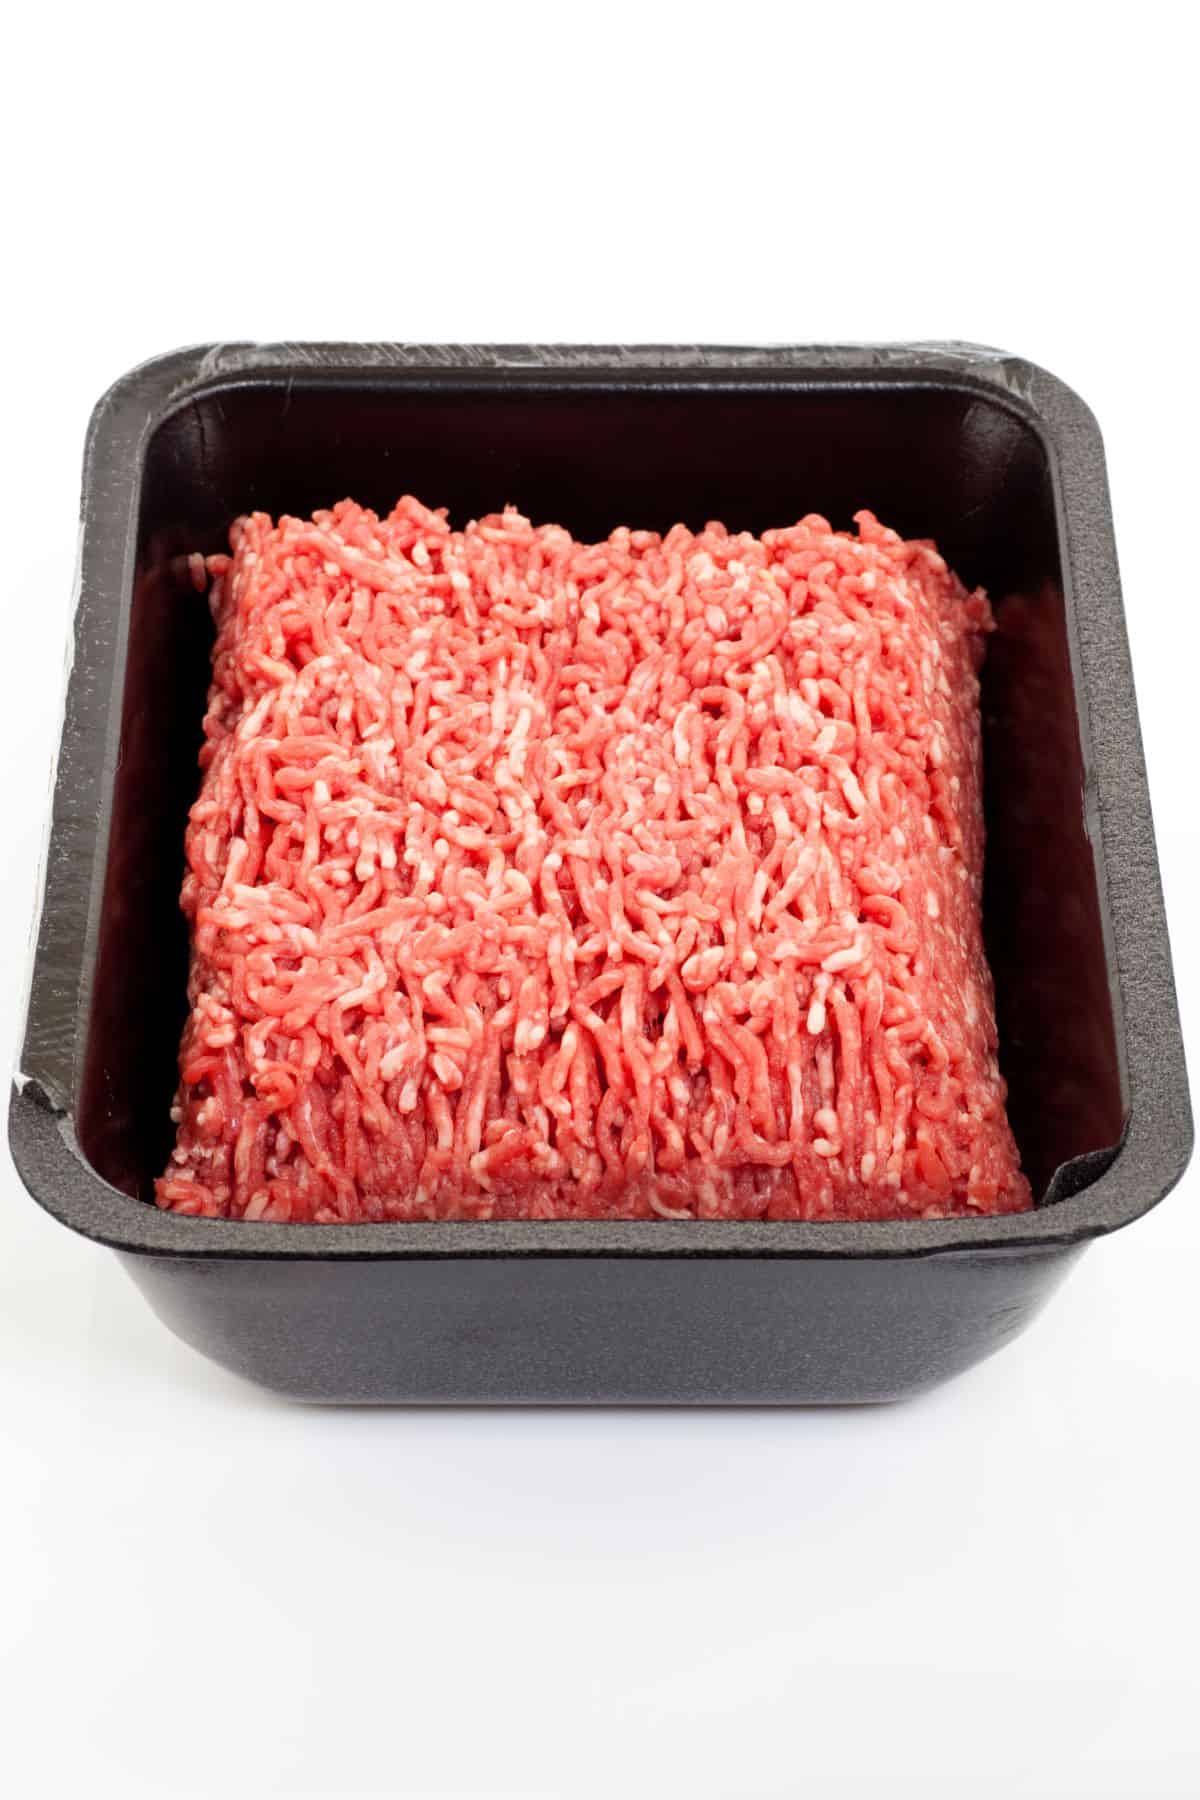 package of ground beef